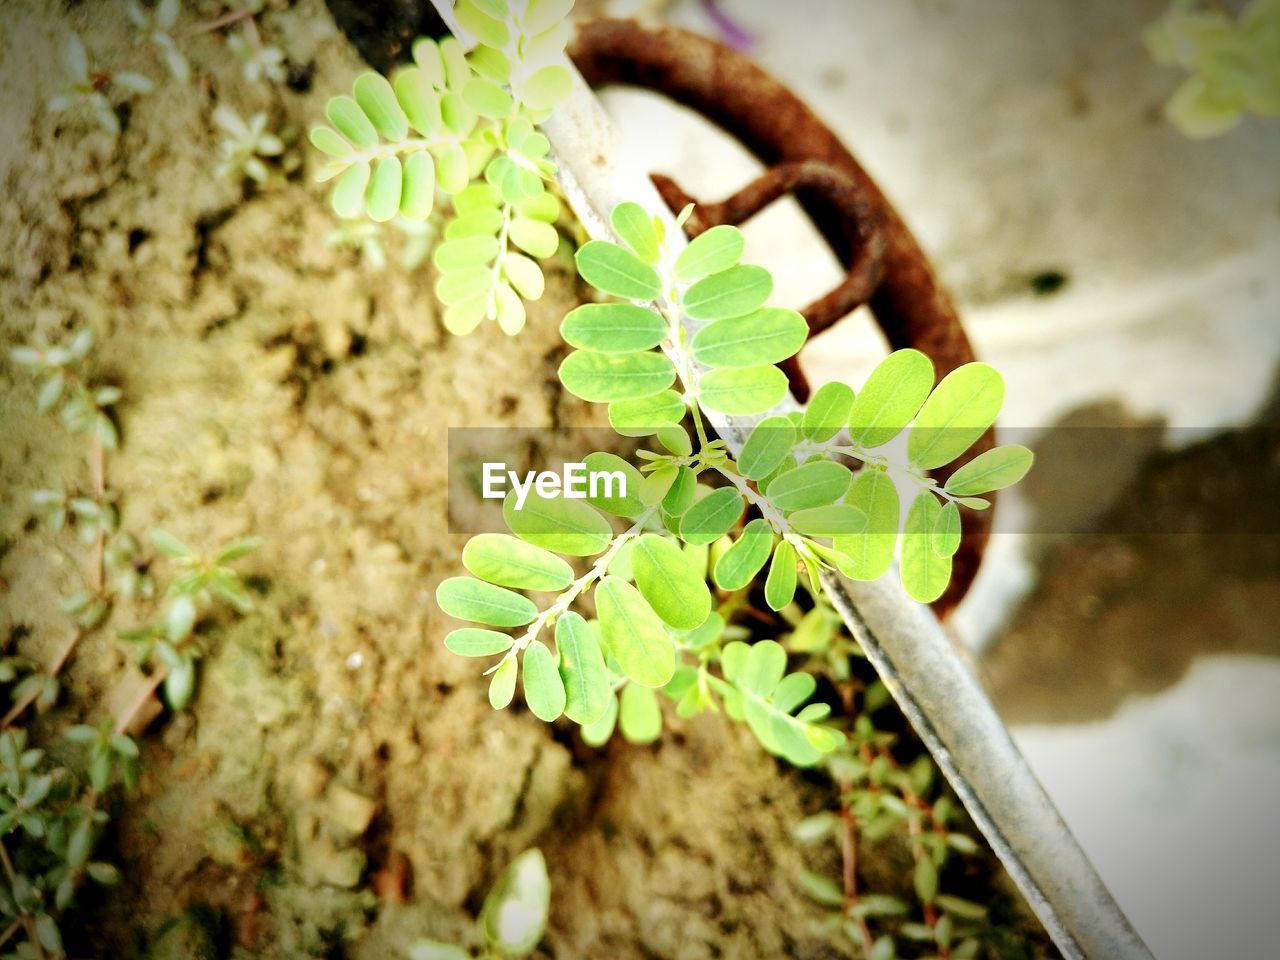 HIGH ANGLE VIEW OF GREEN PLANT ON LEAF